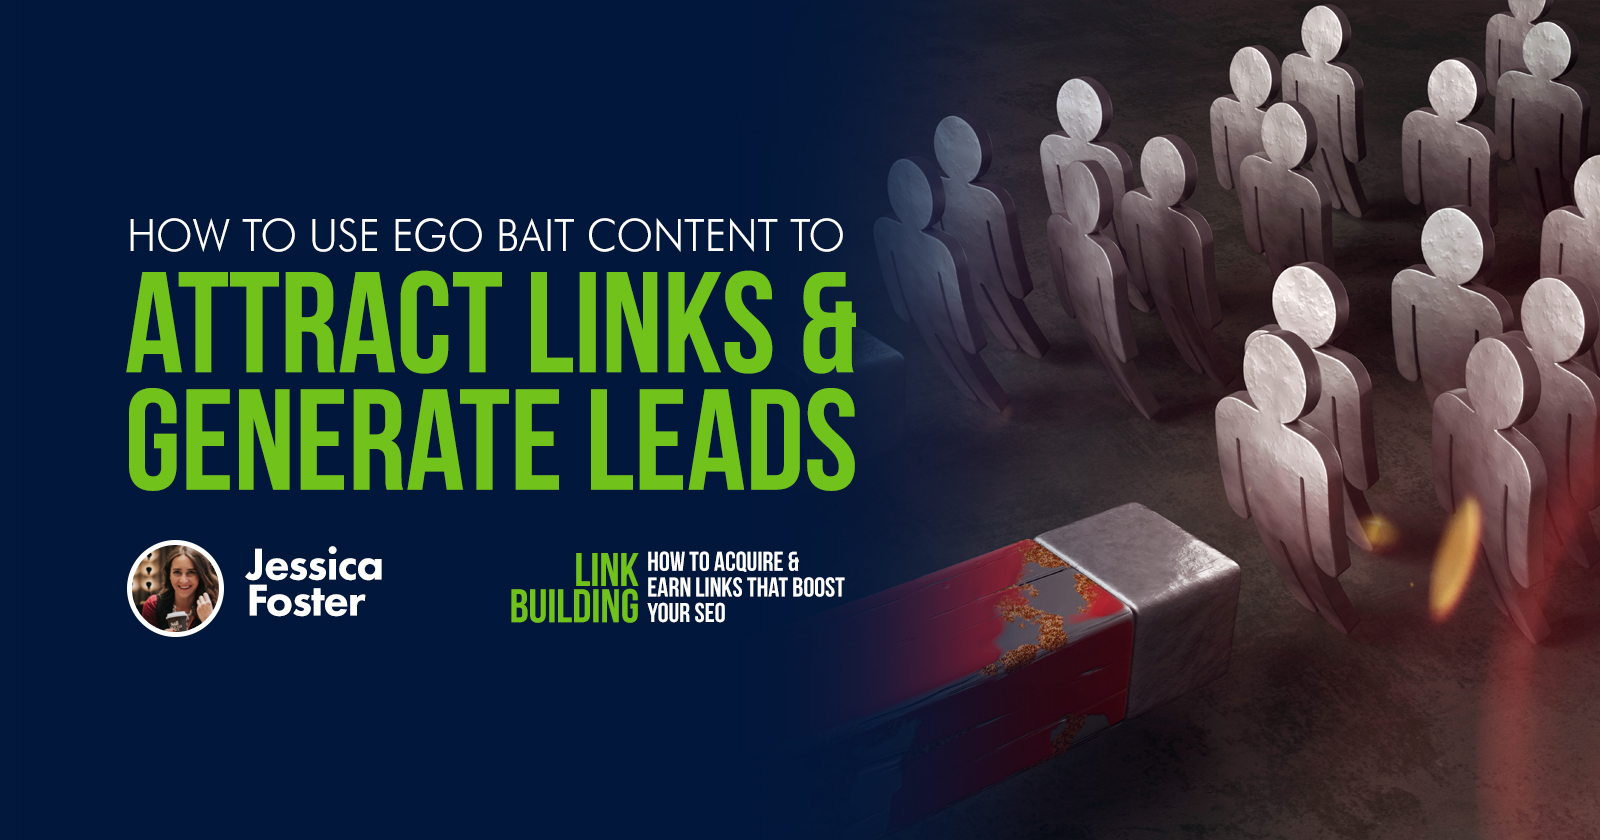 Link Building Guide - Ego Bait Content - Jessica Foster